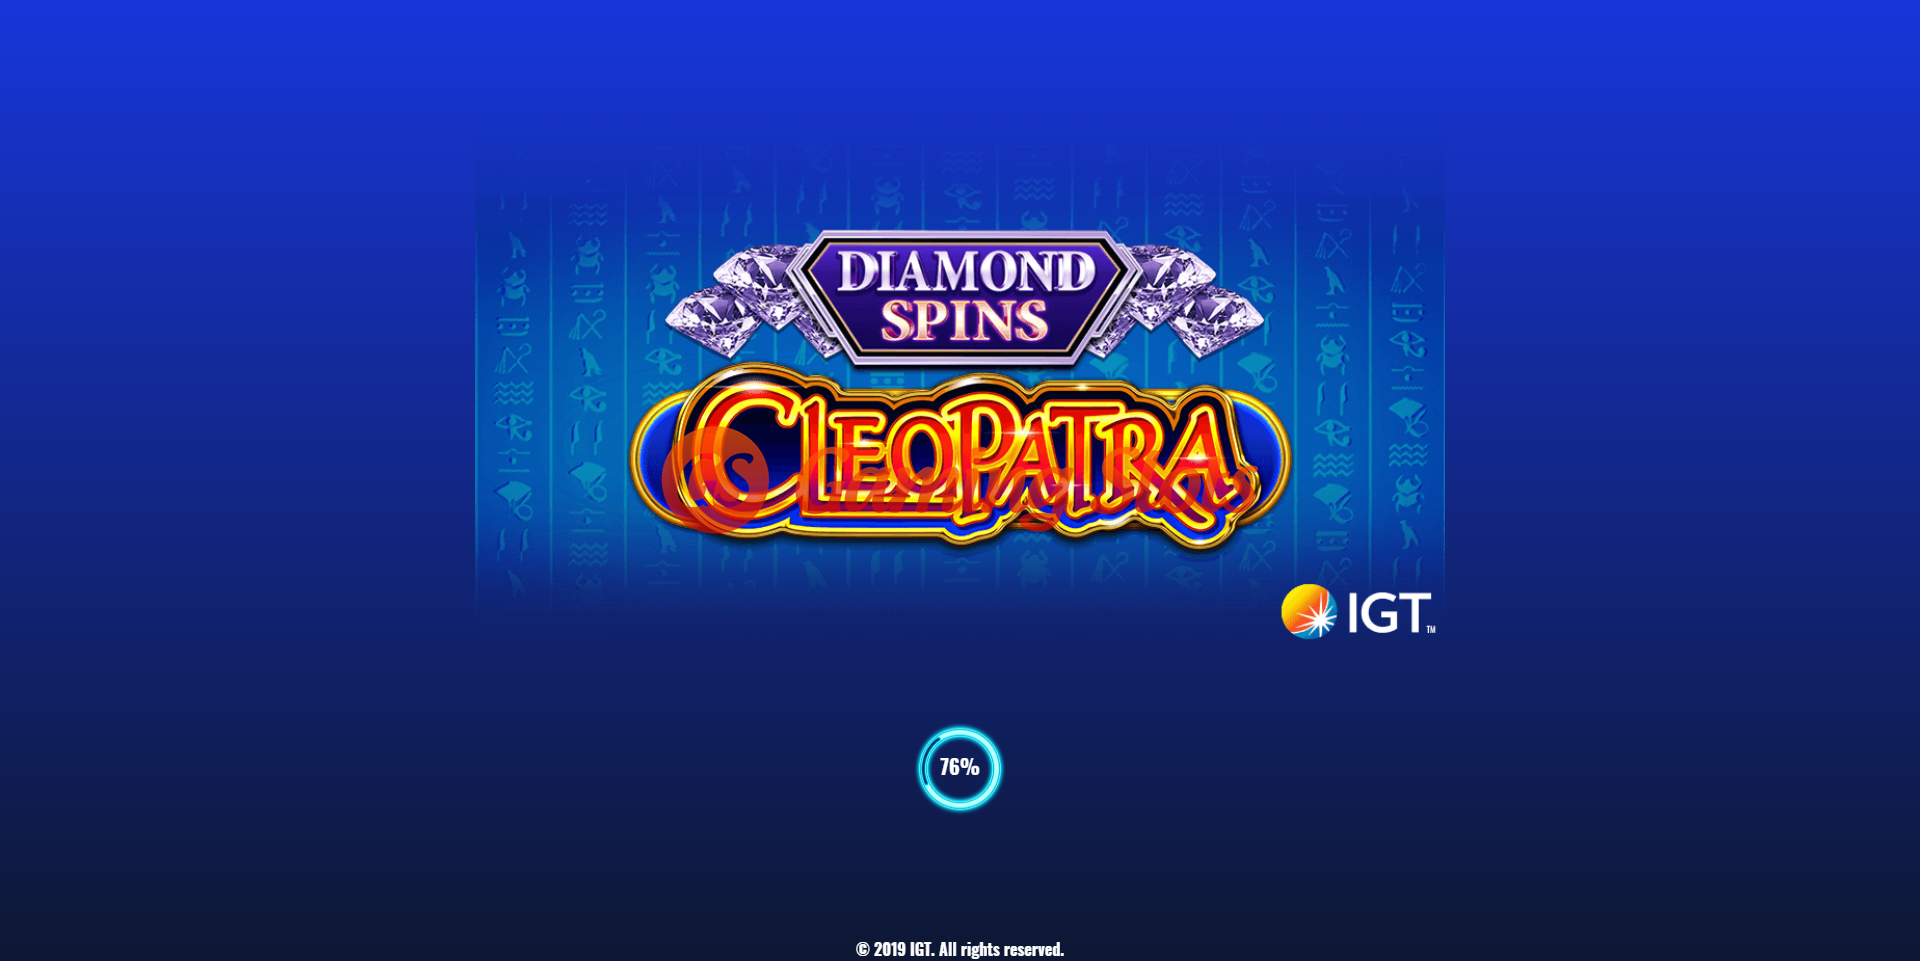 Game Intro for Cleopatra Diamond Spins slot from IGT